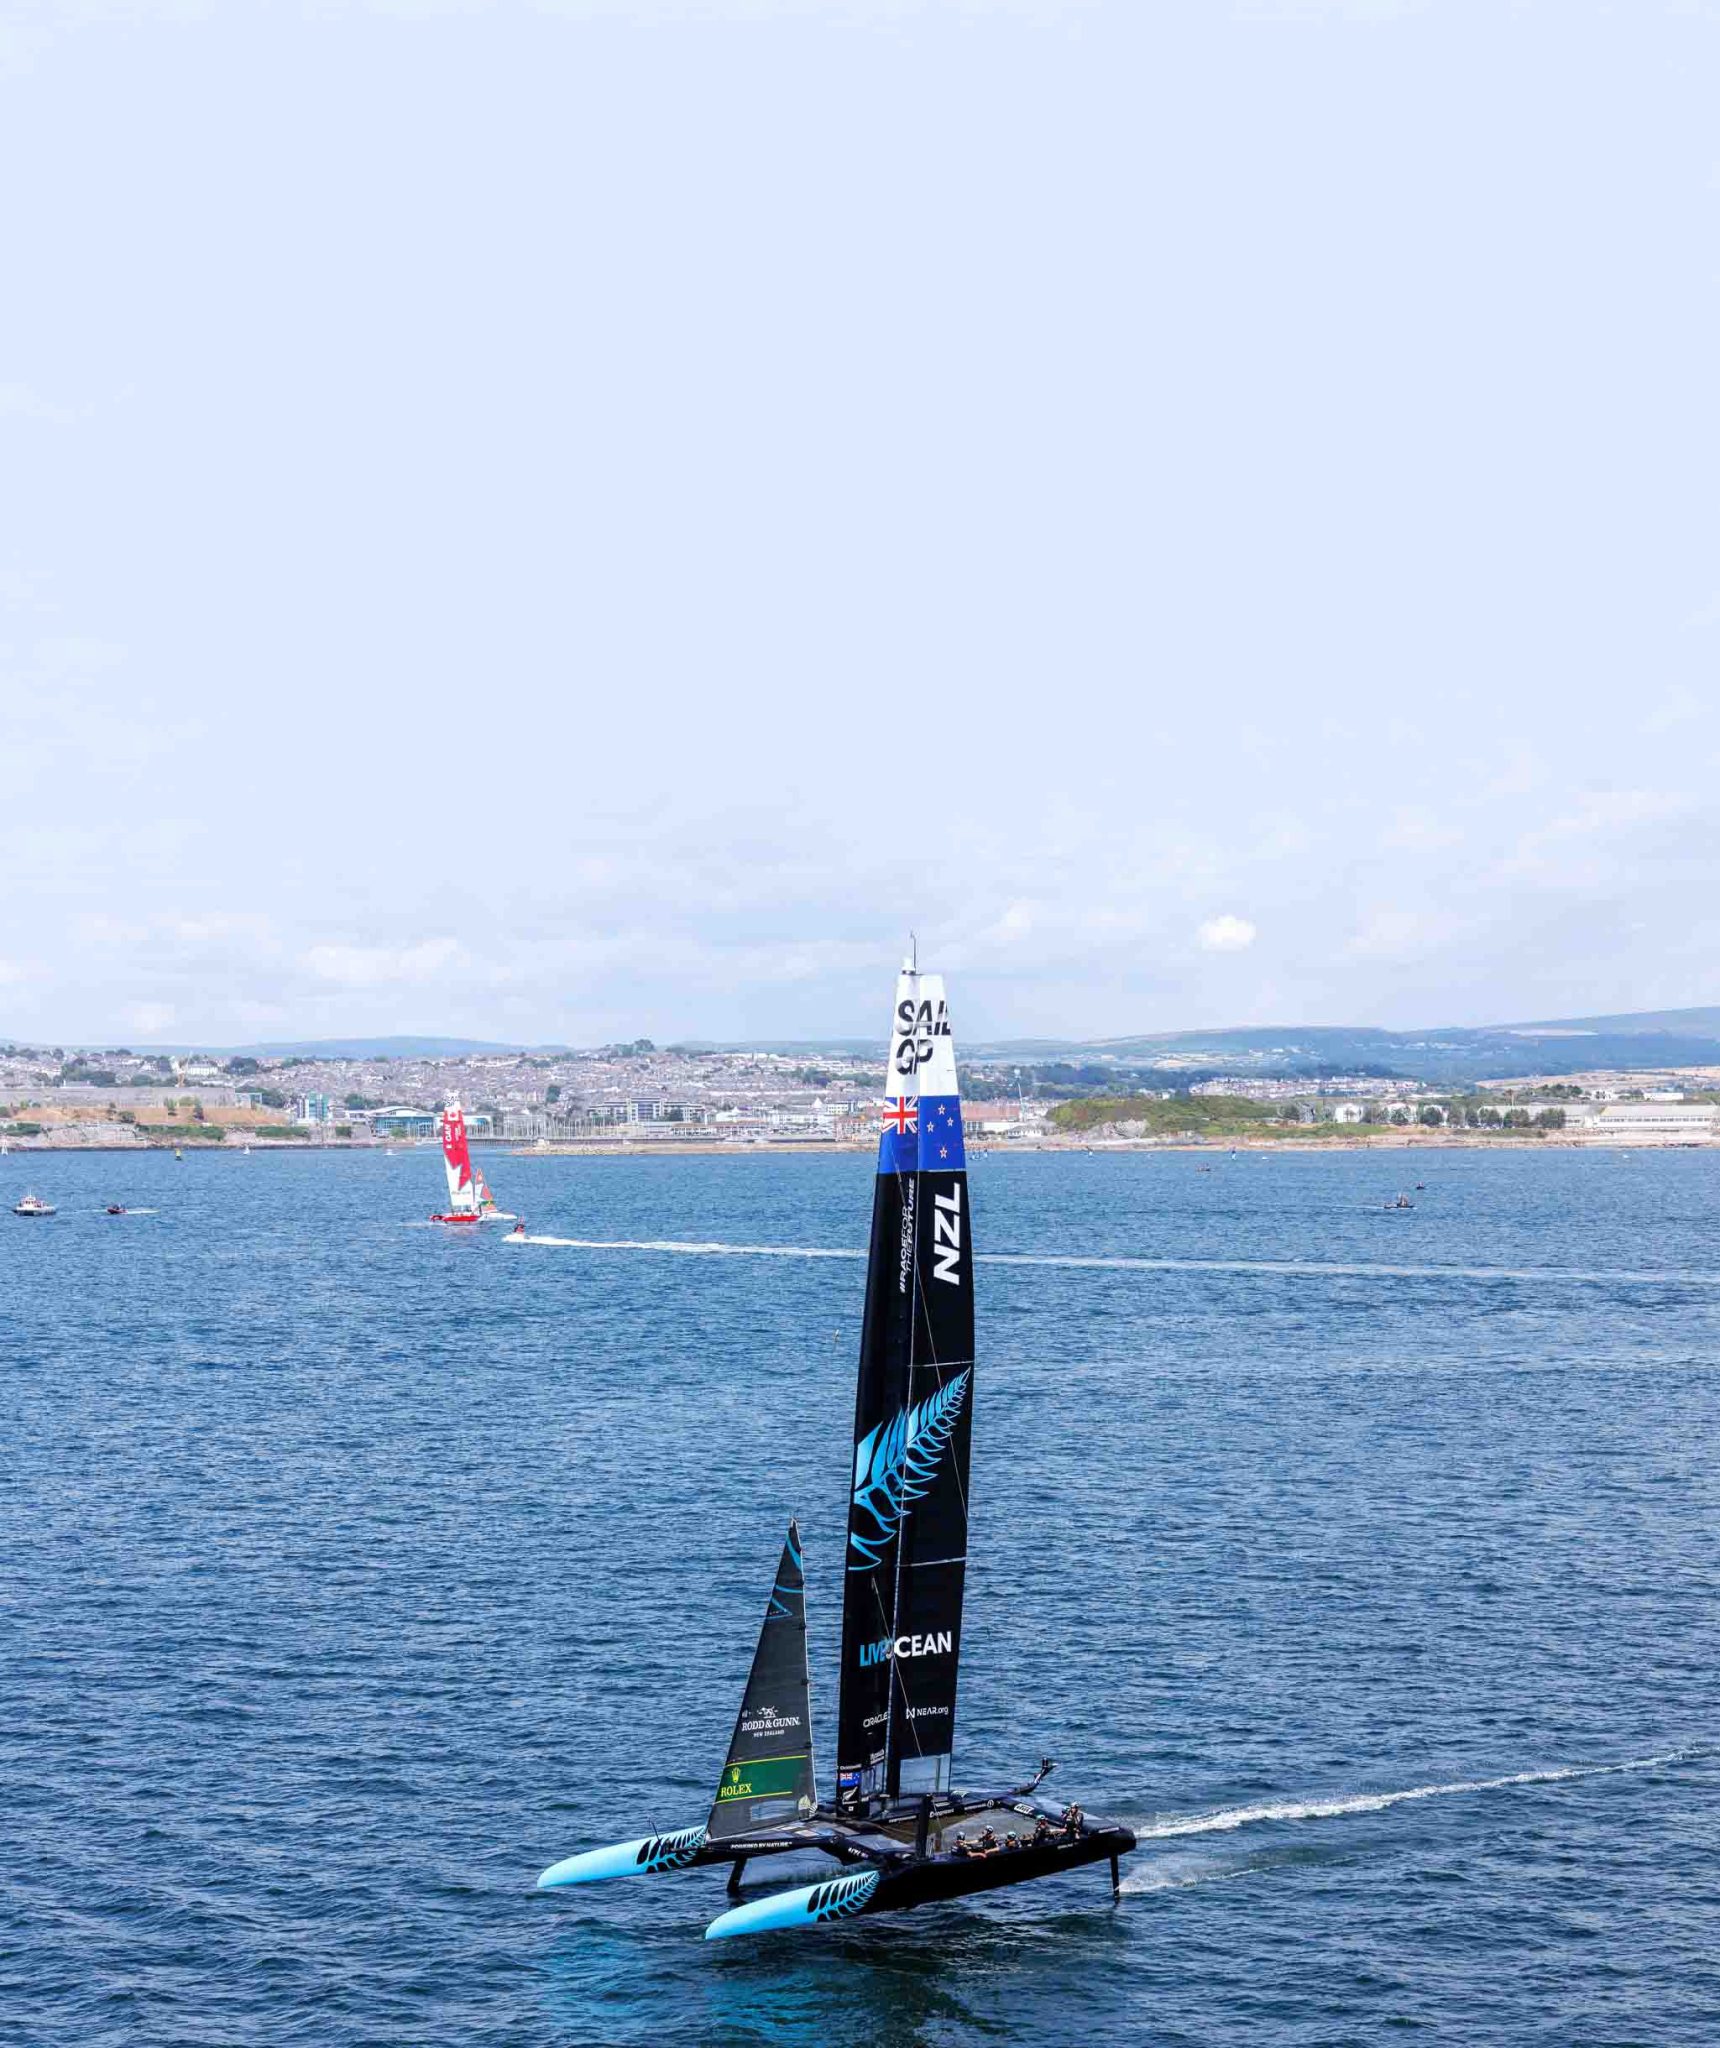 Two more wins for New Zealand SailGP team